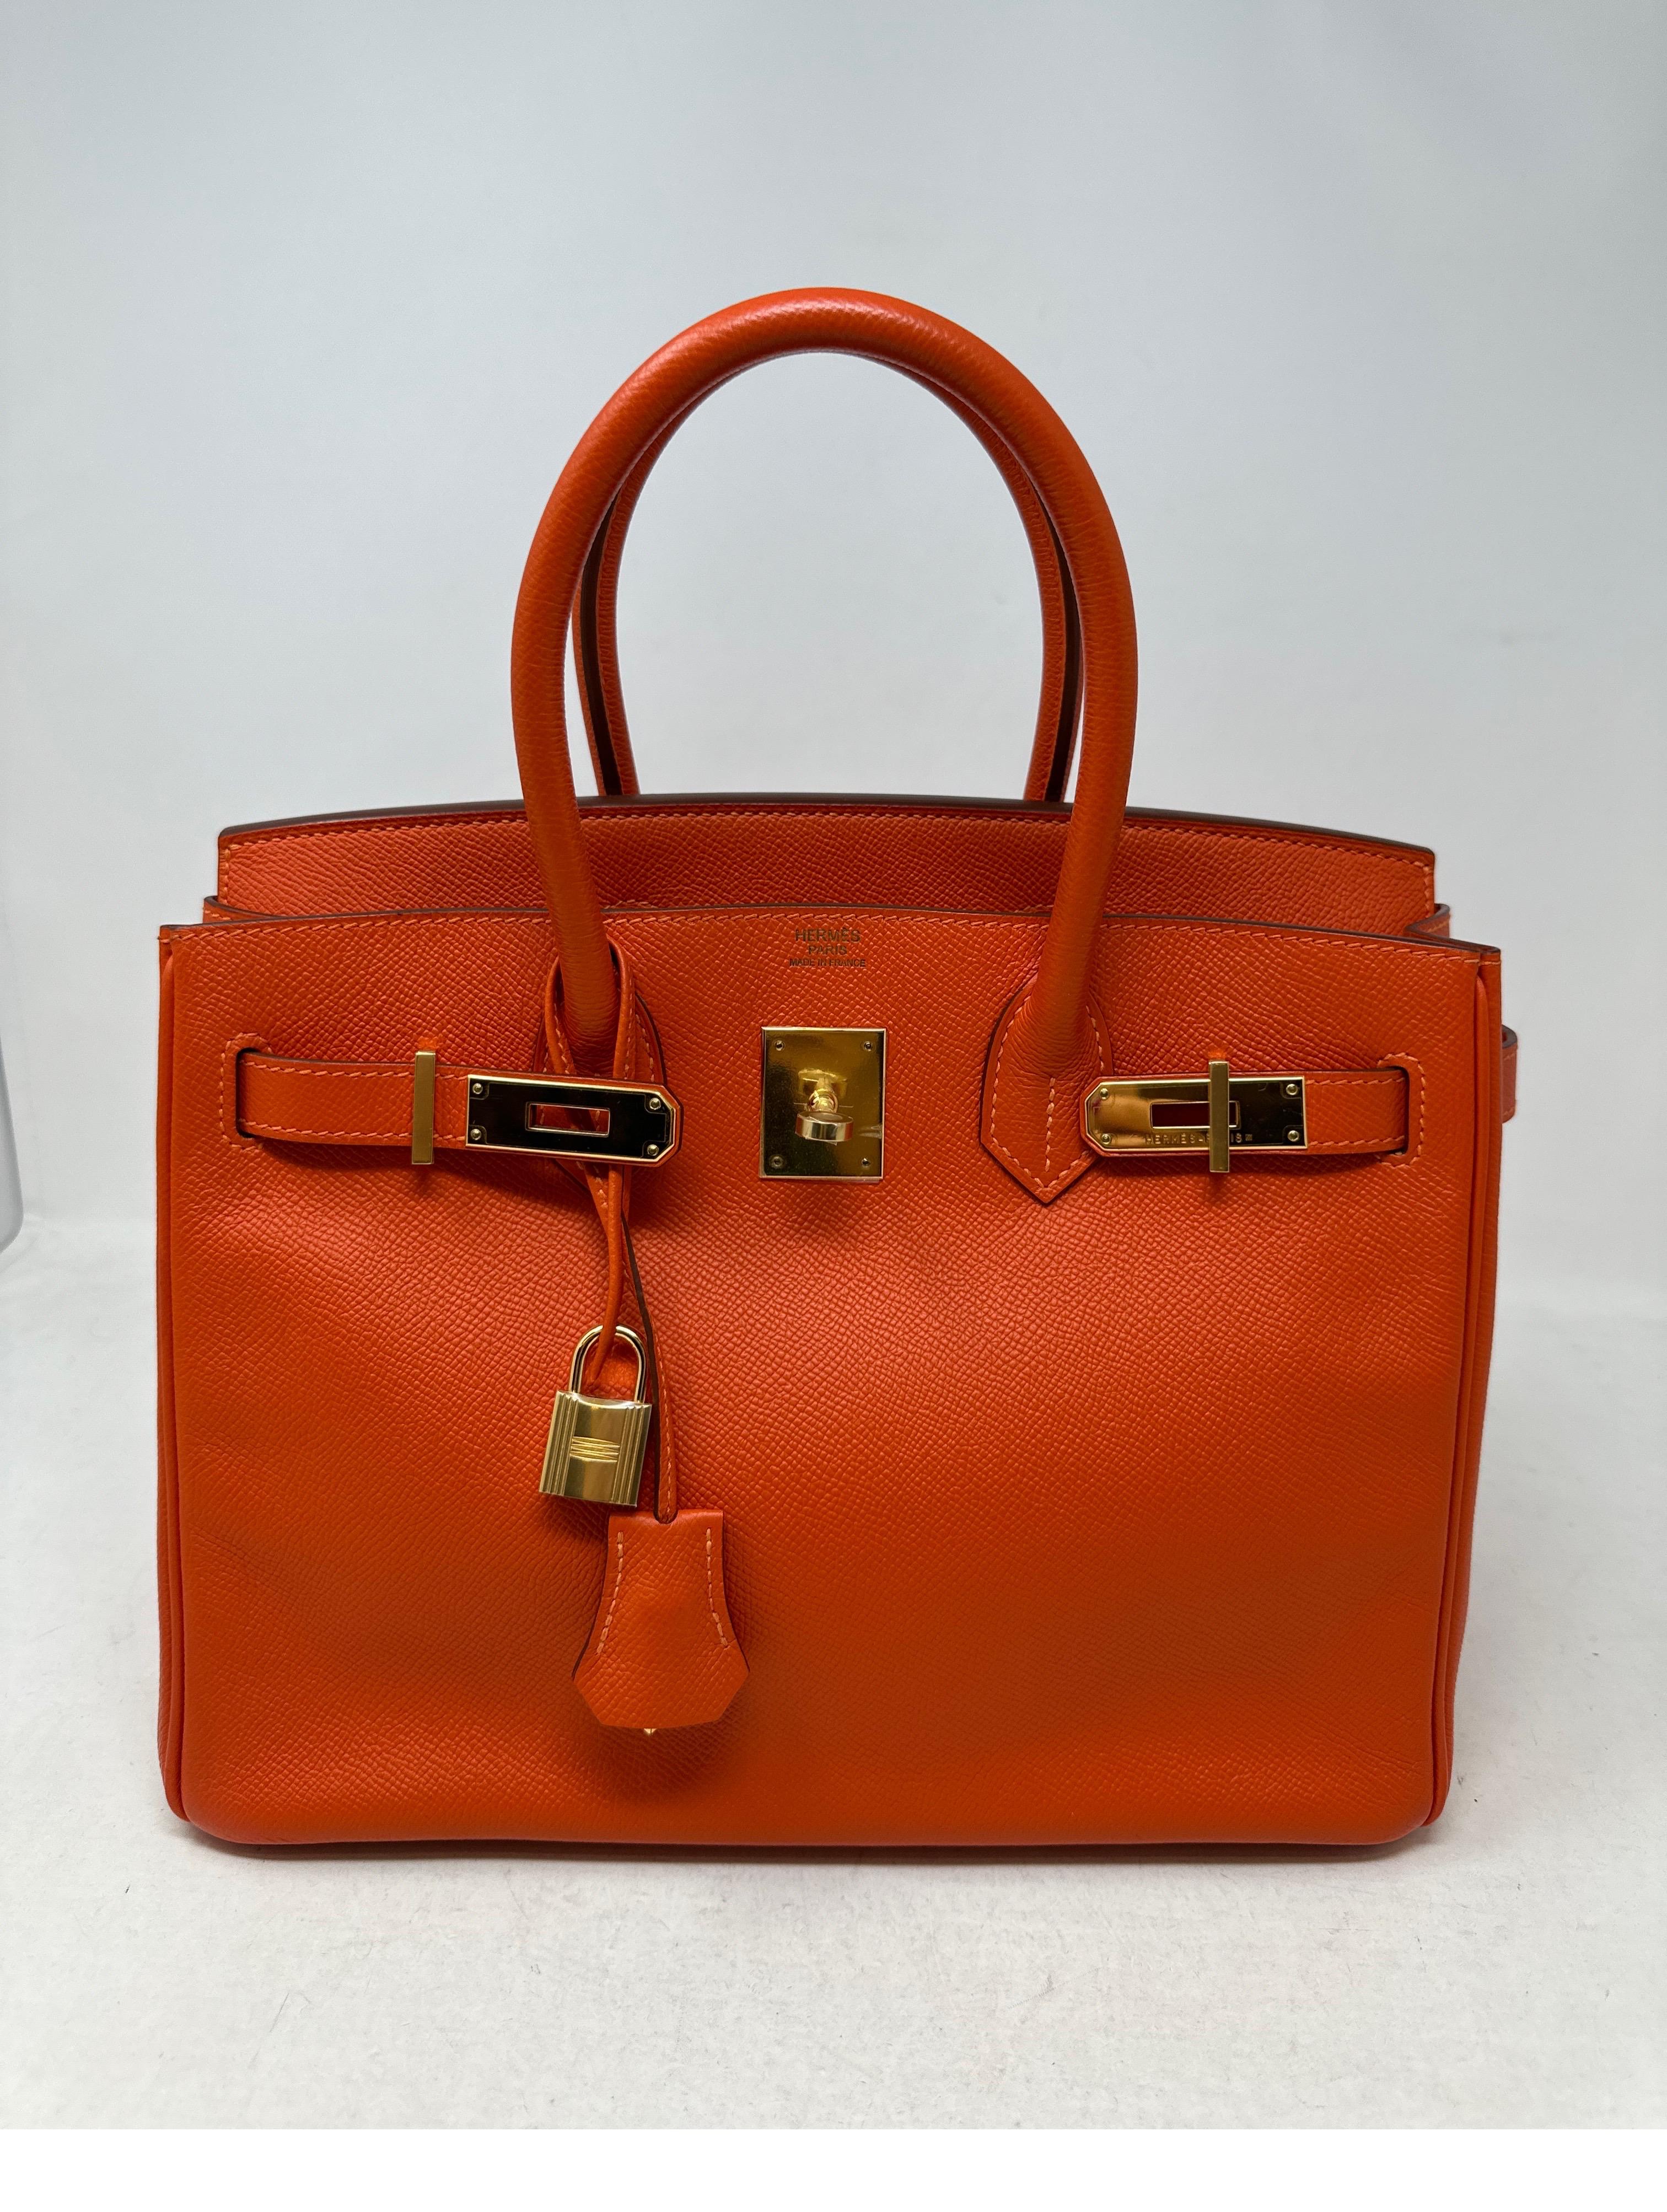 Hermes Poppy Orange Birkin 30 Bag. Epsom leather. Gold hardware. Vibrant orange color. Excellent condition. Plastic still on hardware. O stamp. Interior clean. Includes clochette, lock, keys, and dust bag. Guaranteed authentic. 